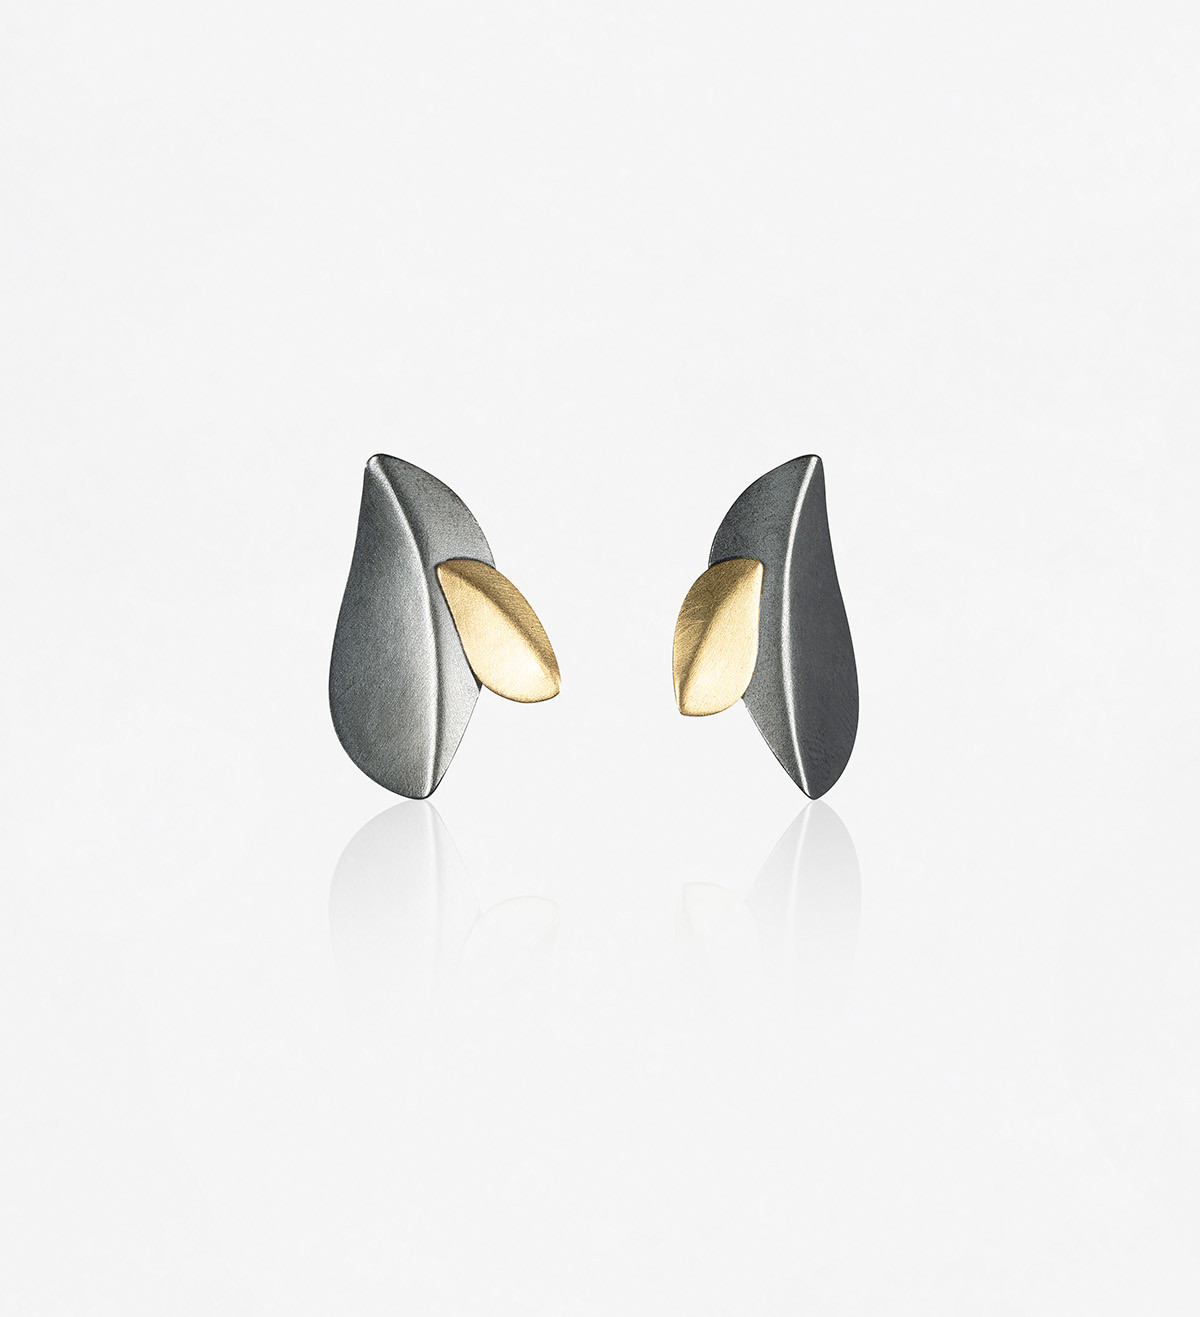 18k gold and silver earrings Creta 2 pieces